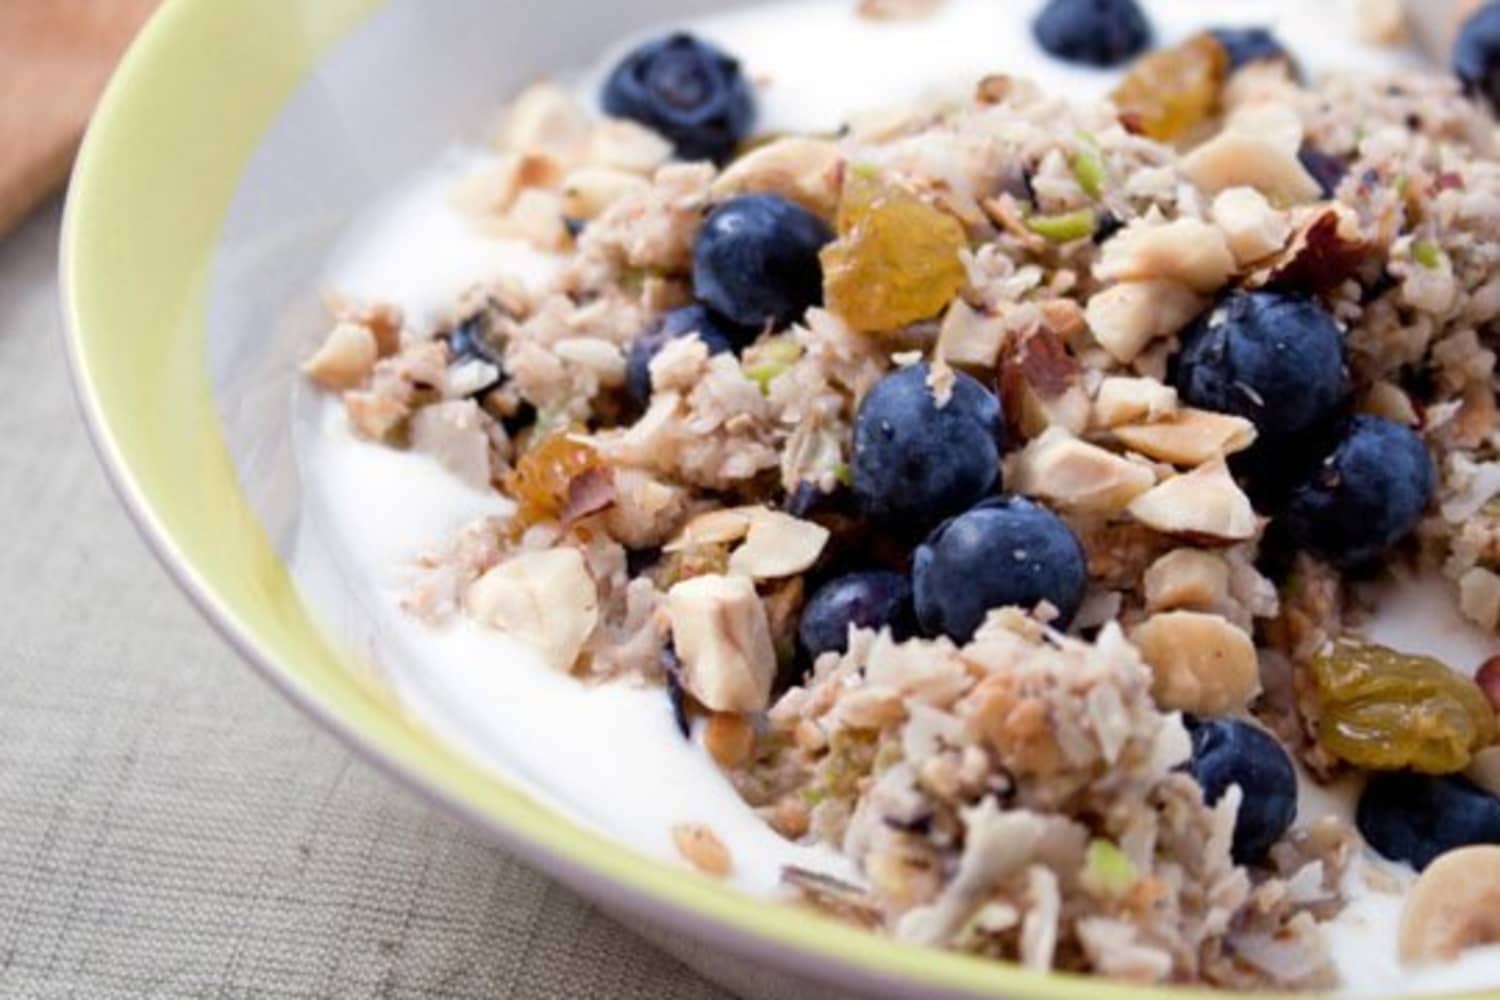 A Break From Granola: Why Muesli Rules | The Kitchn